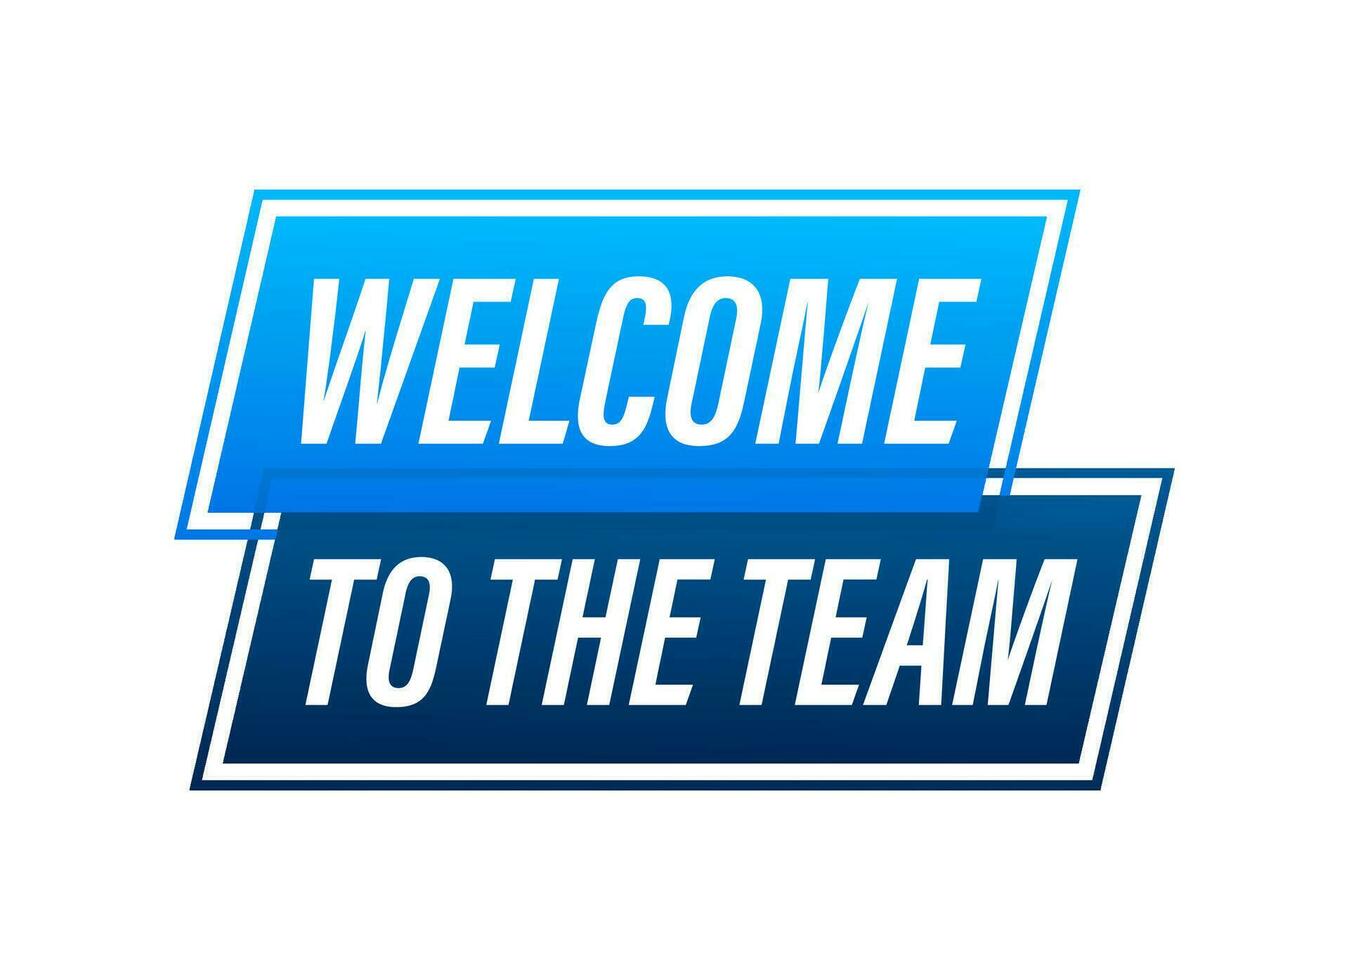 Welcome to the team written on speech bubble. Advertising sign. Vector stock illustration